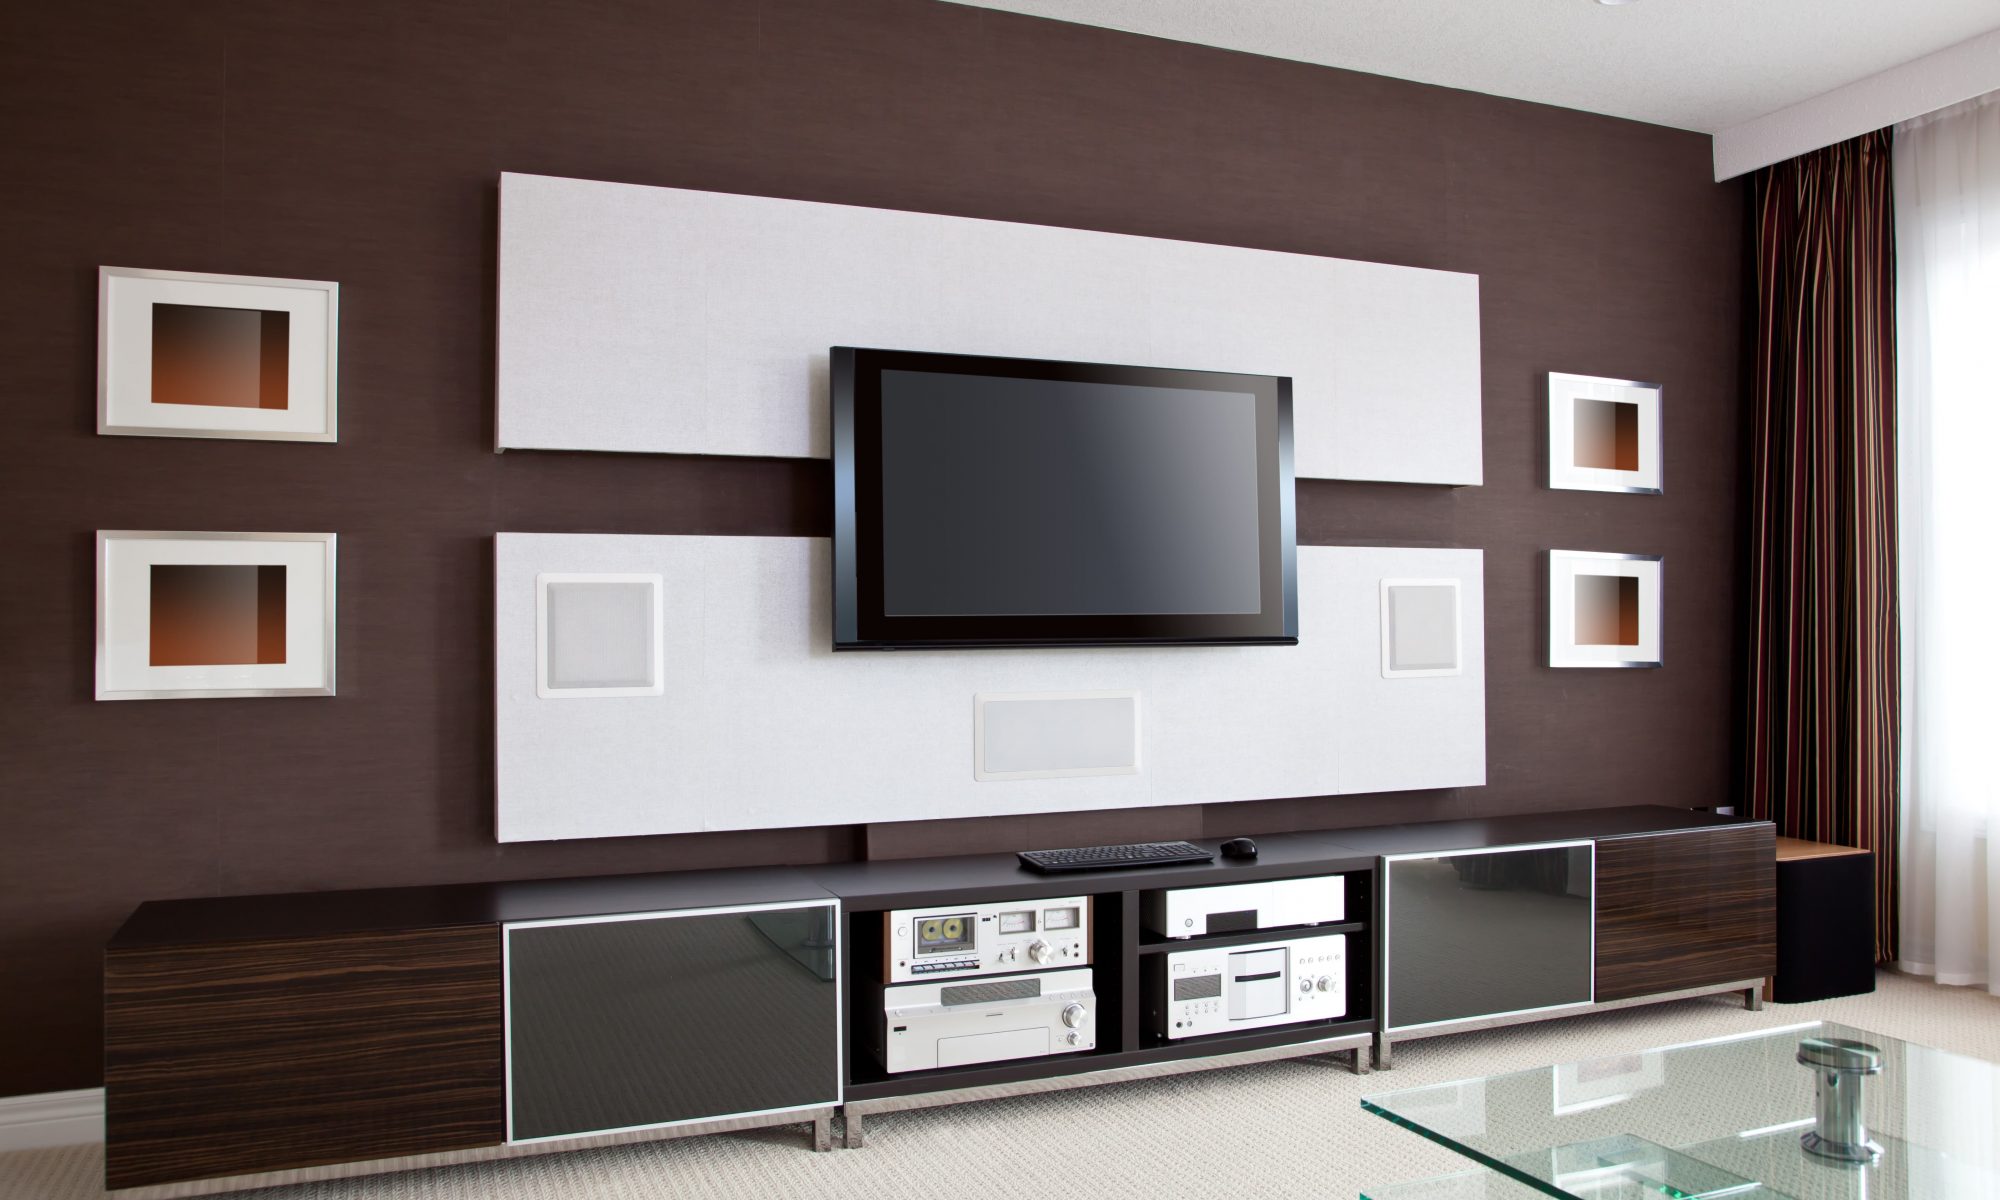 Get the Best Sound in Your San Francisco Apartment or Condo with Performance Audio